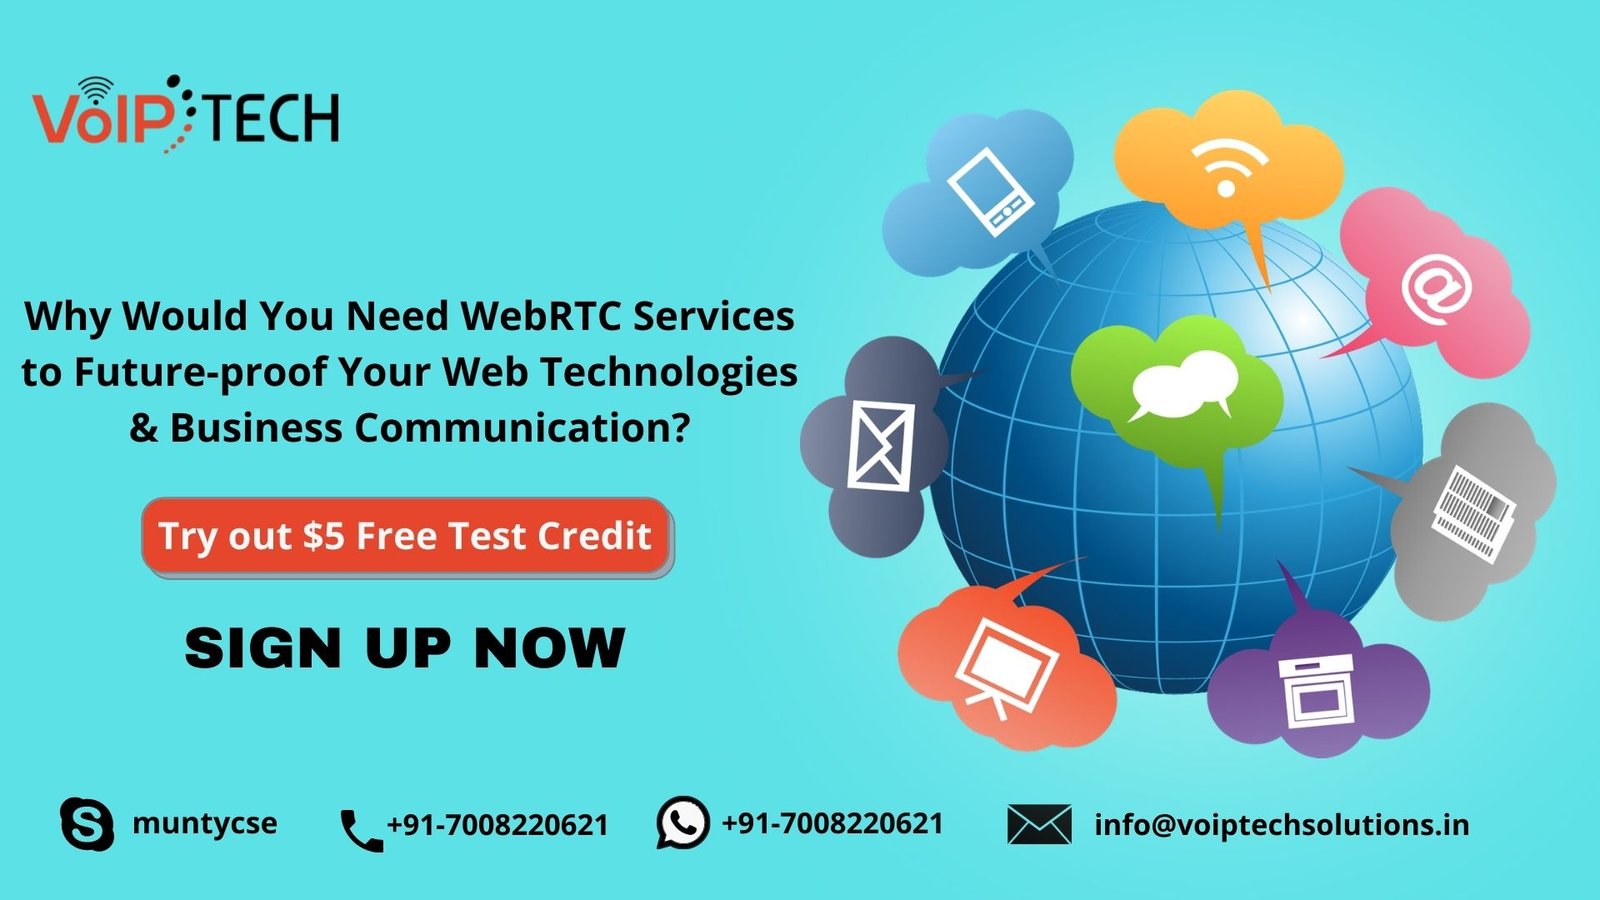 WebRTC Services, I can provide you A to Z destination Routes as per your requirement., Why Would You Need WebRTC Services to Future-proof Your Web Technologies & Business Communication?, VoIP tech solutions, vici dialer, virtual number, Voip Providers, voip services in india, best sip provider, business voip providers, VoIP Phone Numbers, voip minutes provider, top voip providers, voip minutes, International VoIP Provider